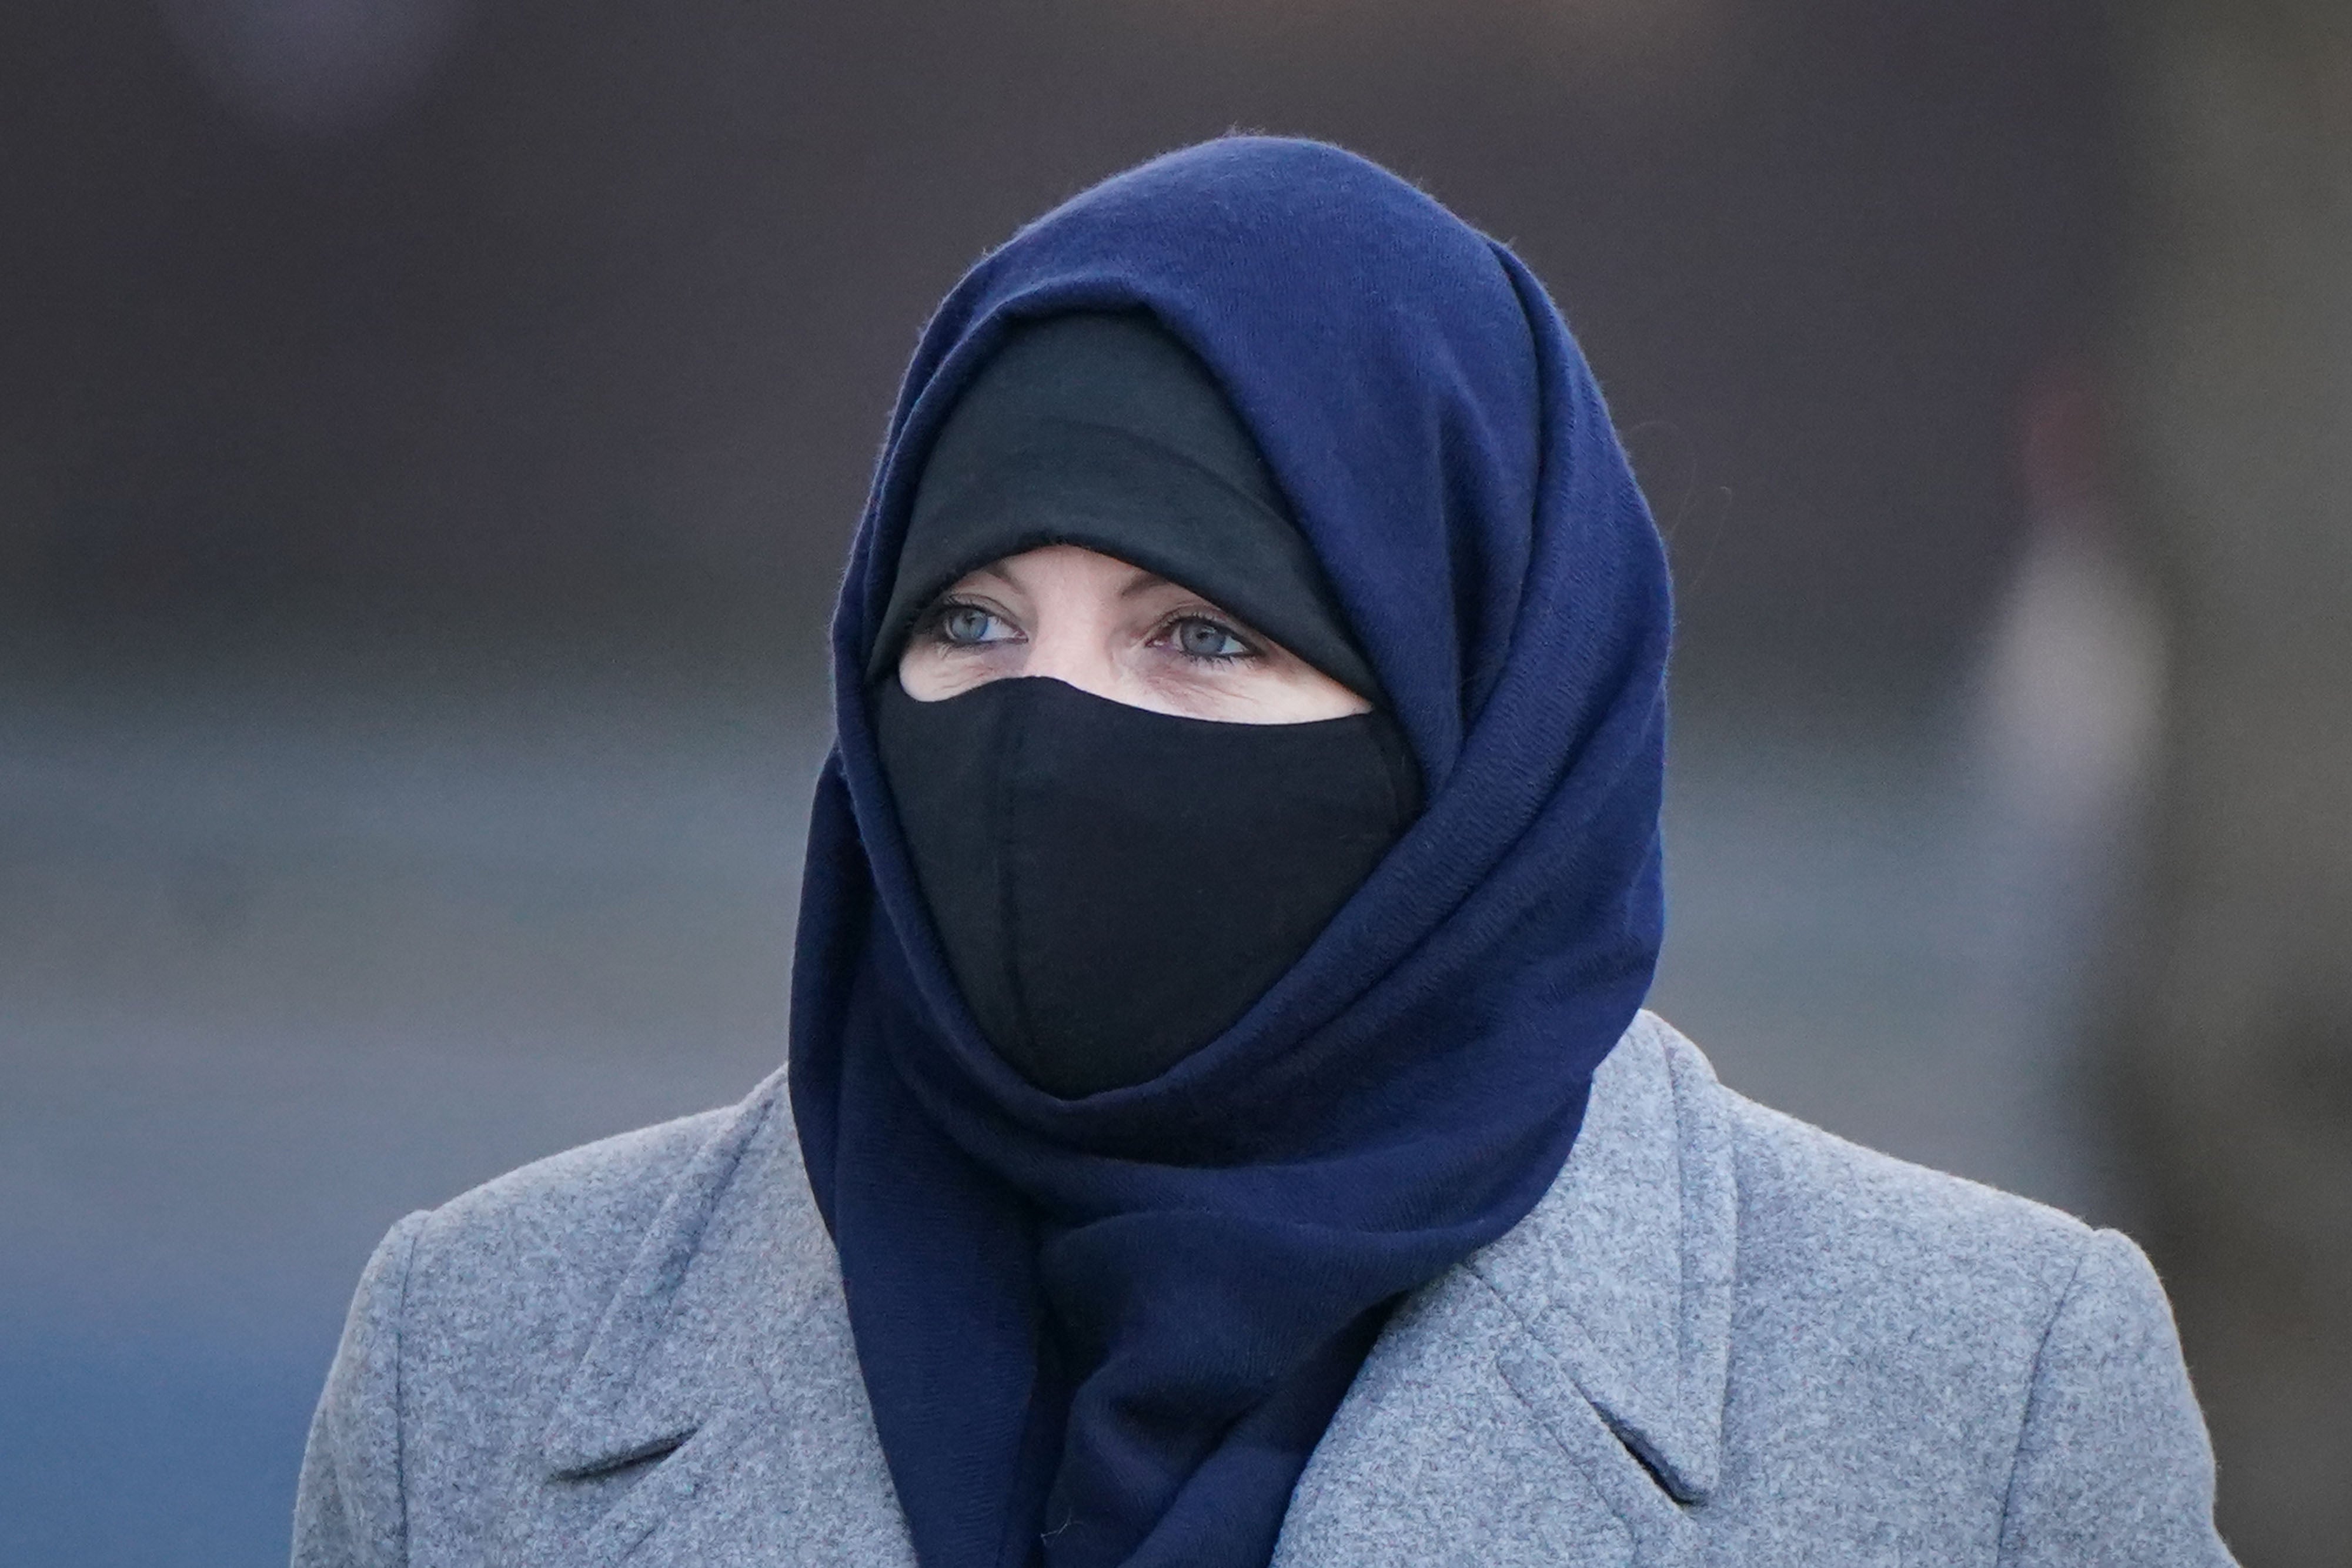 Lisa Smith, accused of terrorism offences, arrives at the at the Special Criminal Court in Dublin (Niall Carson/PA)